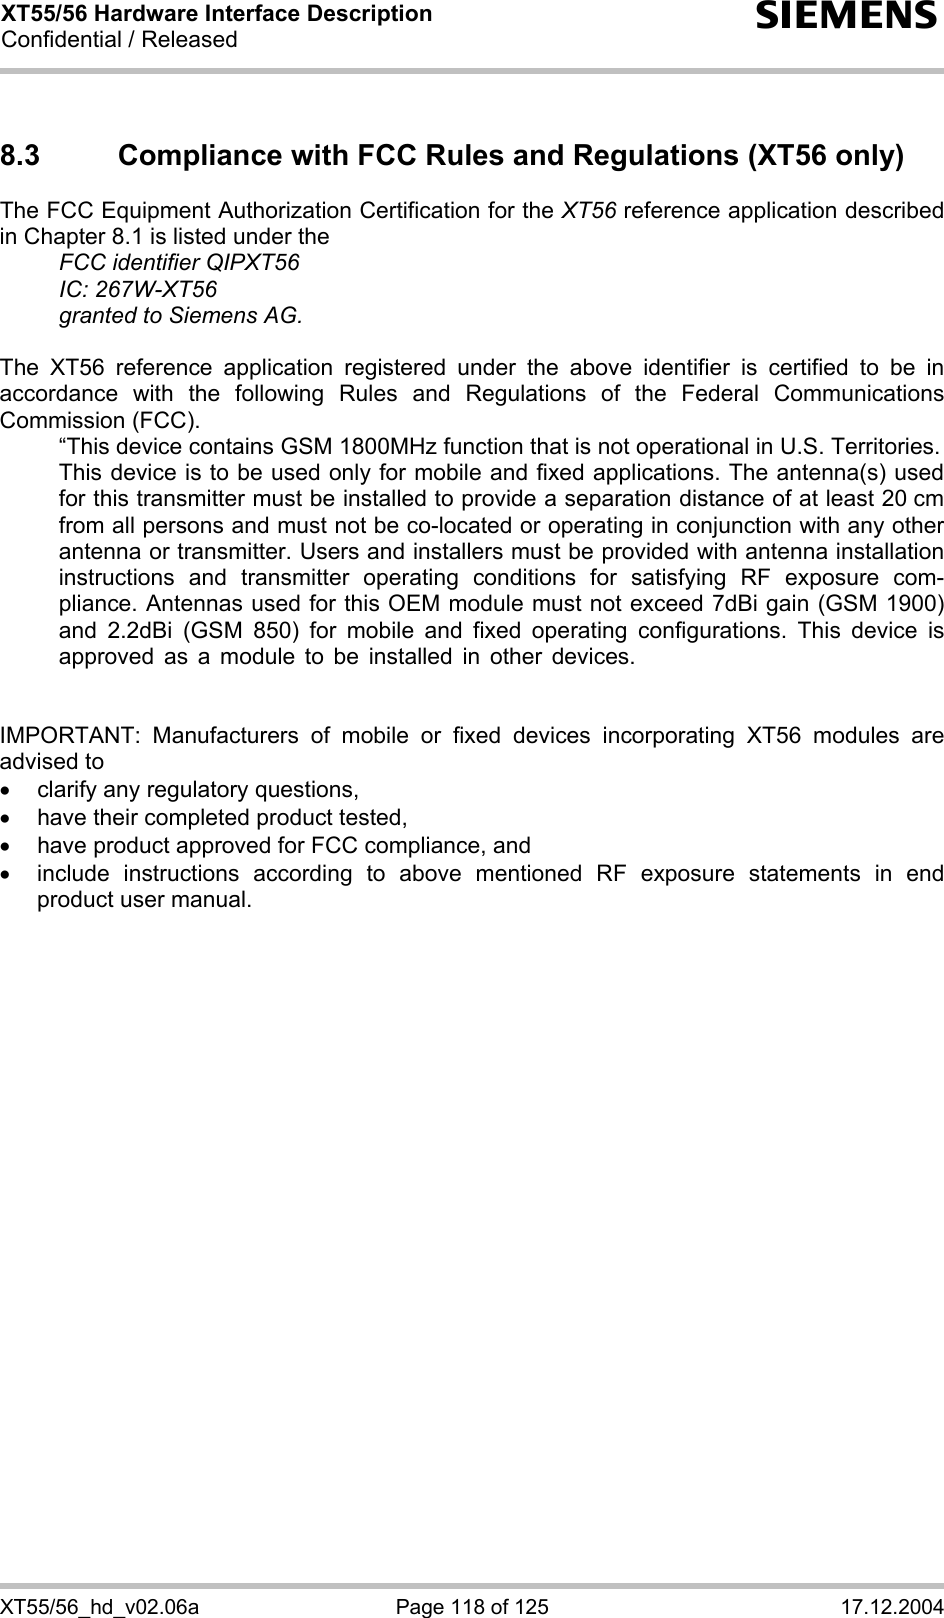 XT55/56 Hardware Interface Description Confidential / Released s XT55/56_hd_v02.06a  Page 118 of 125  17.12.2004 8.3  Compliance with FCC Rules and Regulations (XT56 only) The FCC Equipment Authorization Certification for the XT56 reference application described in Chapter 8.1 is listed under the   FCC identifier QIPXT56  IC: 267W-XT56   granted to Siemens AG.   The XT56 reference application registered under the above identifier is certified to be in accordance with the following Rules and Regulations of the Federal Communications Commission (FCC).    “This device contains GSM 1800MHz function that is not operational in U.S. Territories.    This device is to be used only for mobile and fixed applications. The antenna(s) used for this transmitter must be installed to provide a separation distance of at least 20 cm from all persons and must not be co-located or operating in conjunction with any other antenna or transmitter. Users and installers must be provided with antenna installation instructions and transmitter operating conditions for satisfying RF exposure com-pliance. Antennas used for this OEM module must not exceed 7dBi gain (GSM 1900) and 2.2dBi (GSM 850) for mobile and fixed operating configurations. This device is approved as a module to be installed in other devices.  IMPORTANT: Manufacturers of mobile or fixed devices incorporating XT56 modules are advised to •  clarify any regulatory questions, • have their completed product tested, •  have product approved for FCC compliance, and •  include instructions according to above mentioned RF exposure statements in end product user manual.     